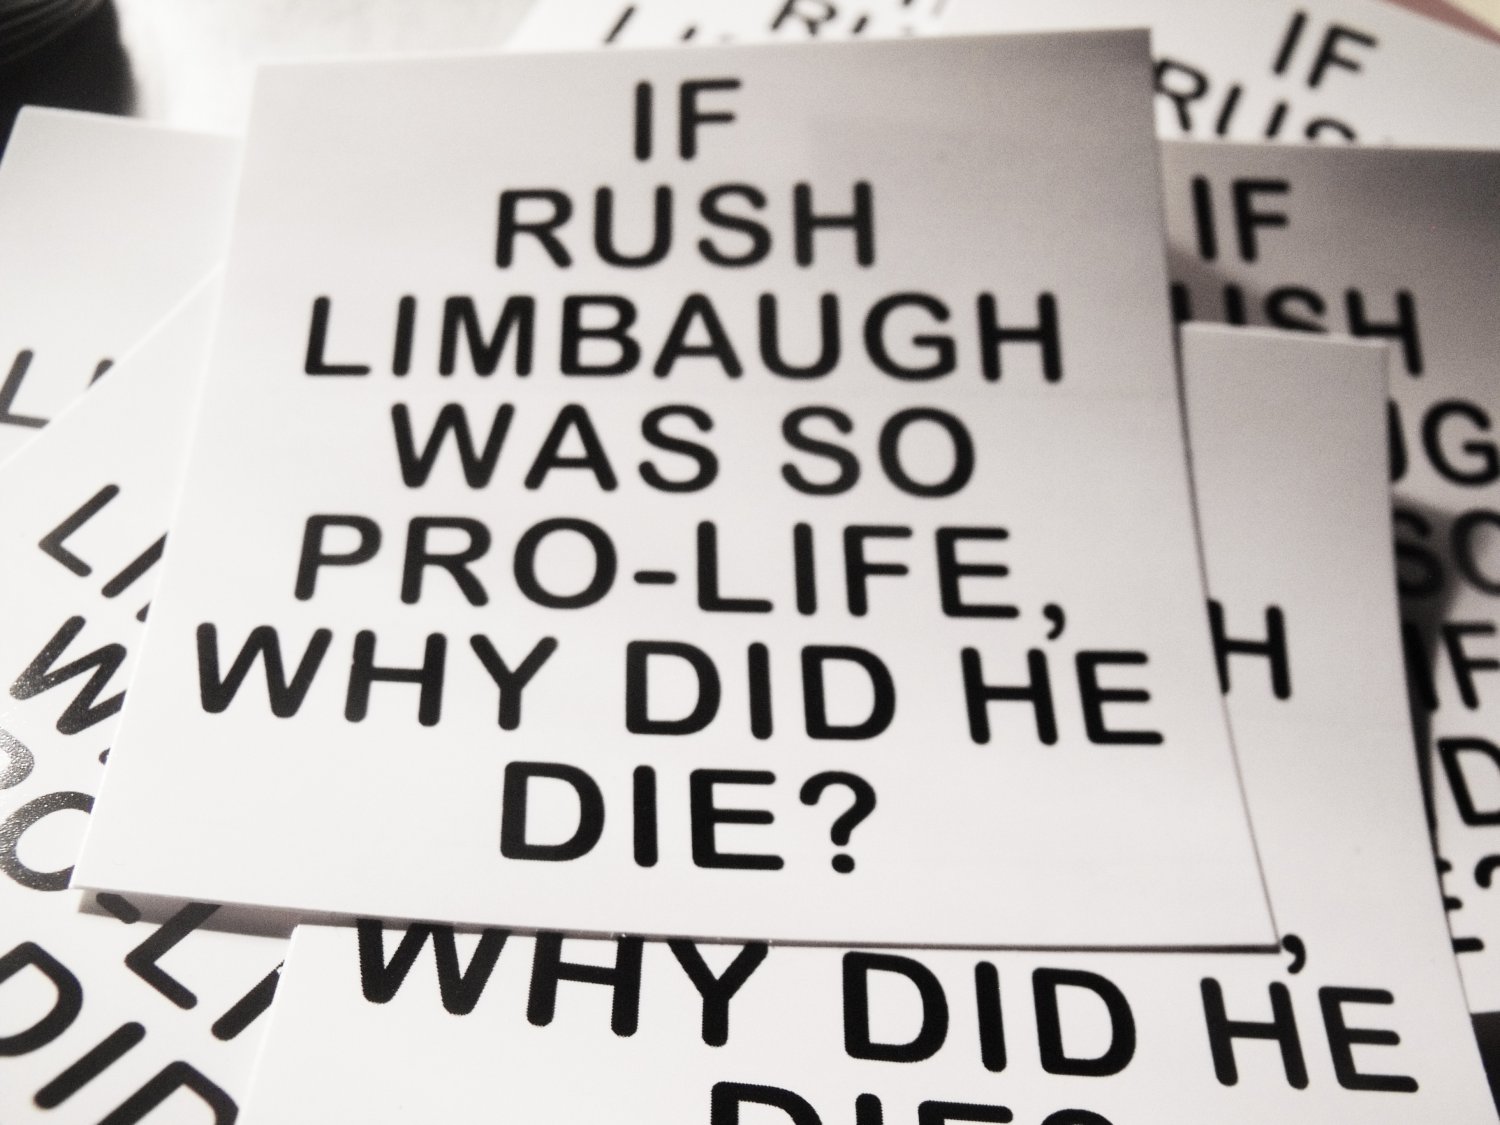 100  IF RUSH LIMBAUGH WAS SO PRO-LIFE, WHY DID HE DIE?  2.5" x 2.5"  stickers